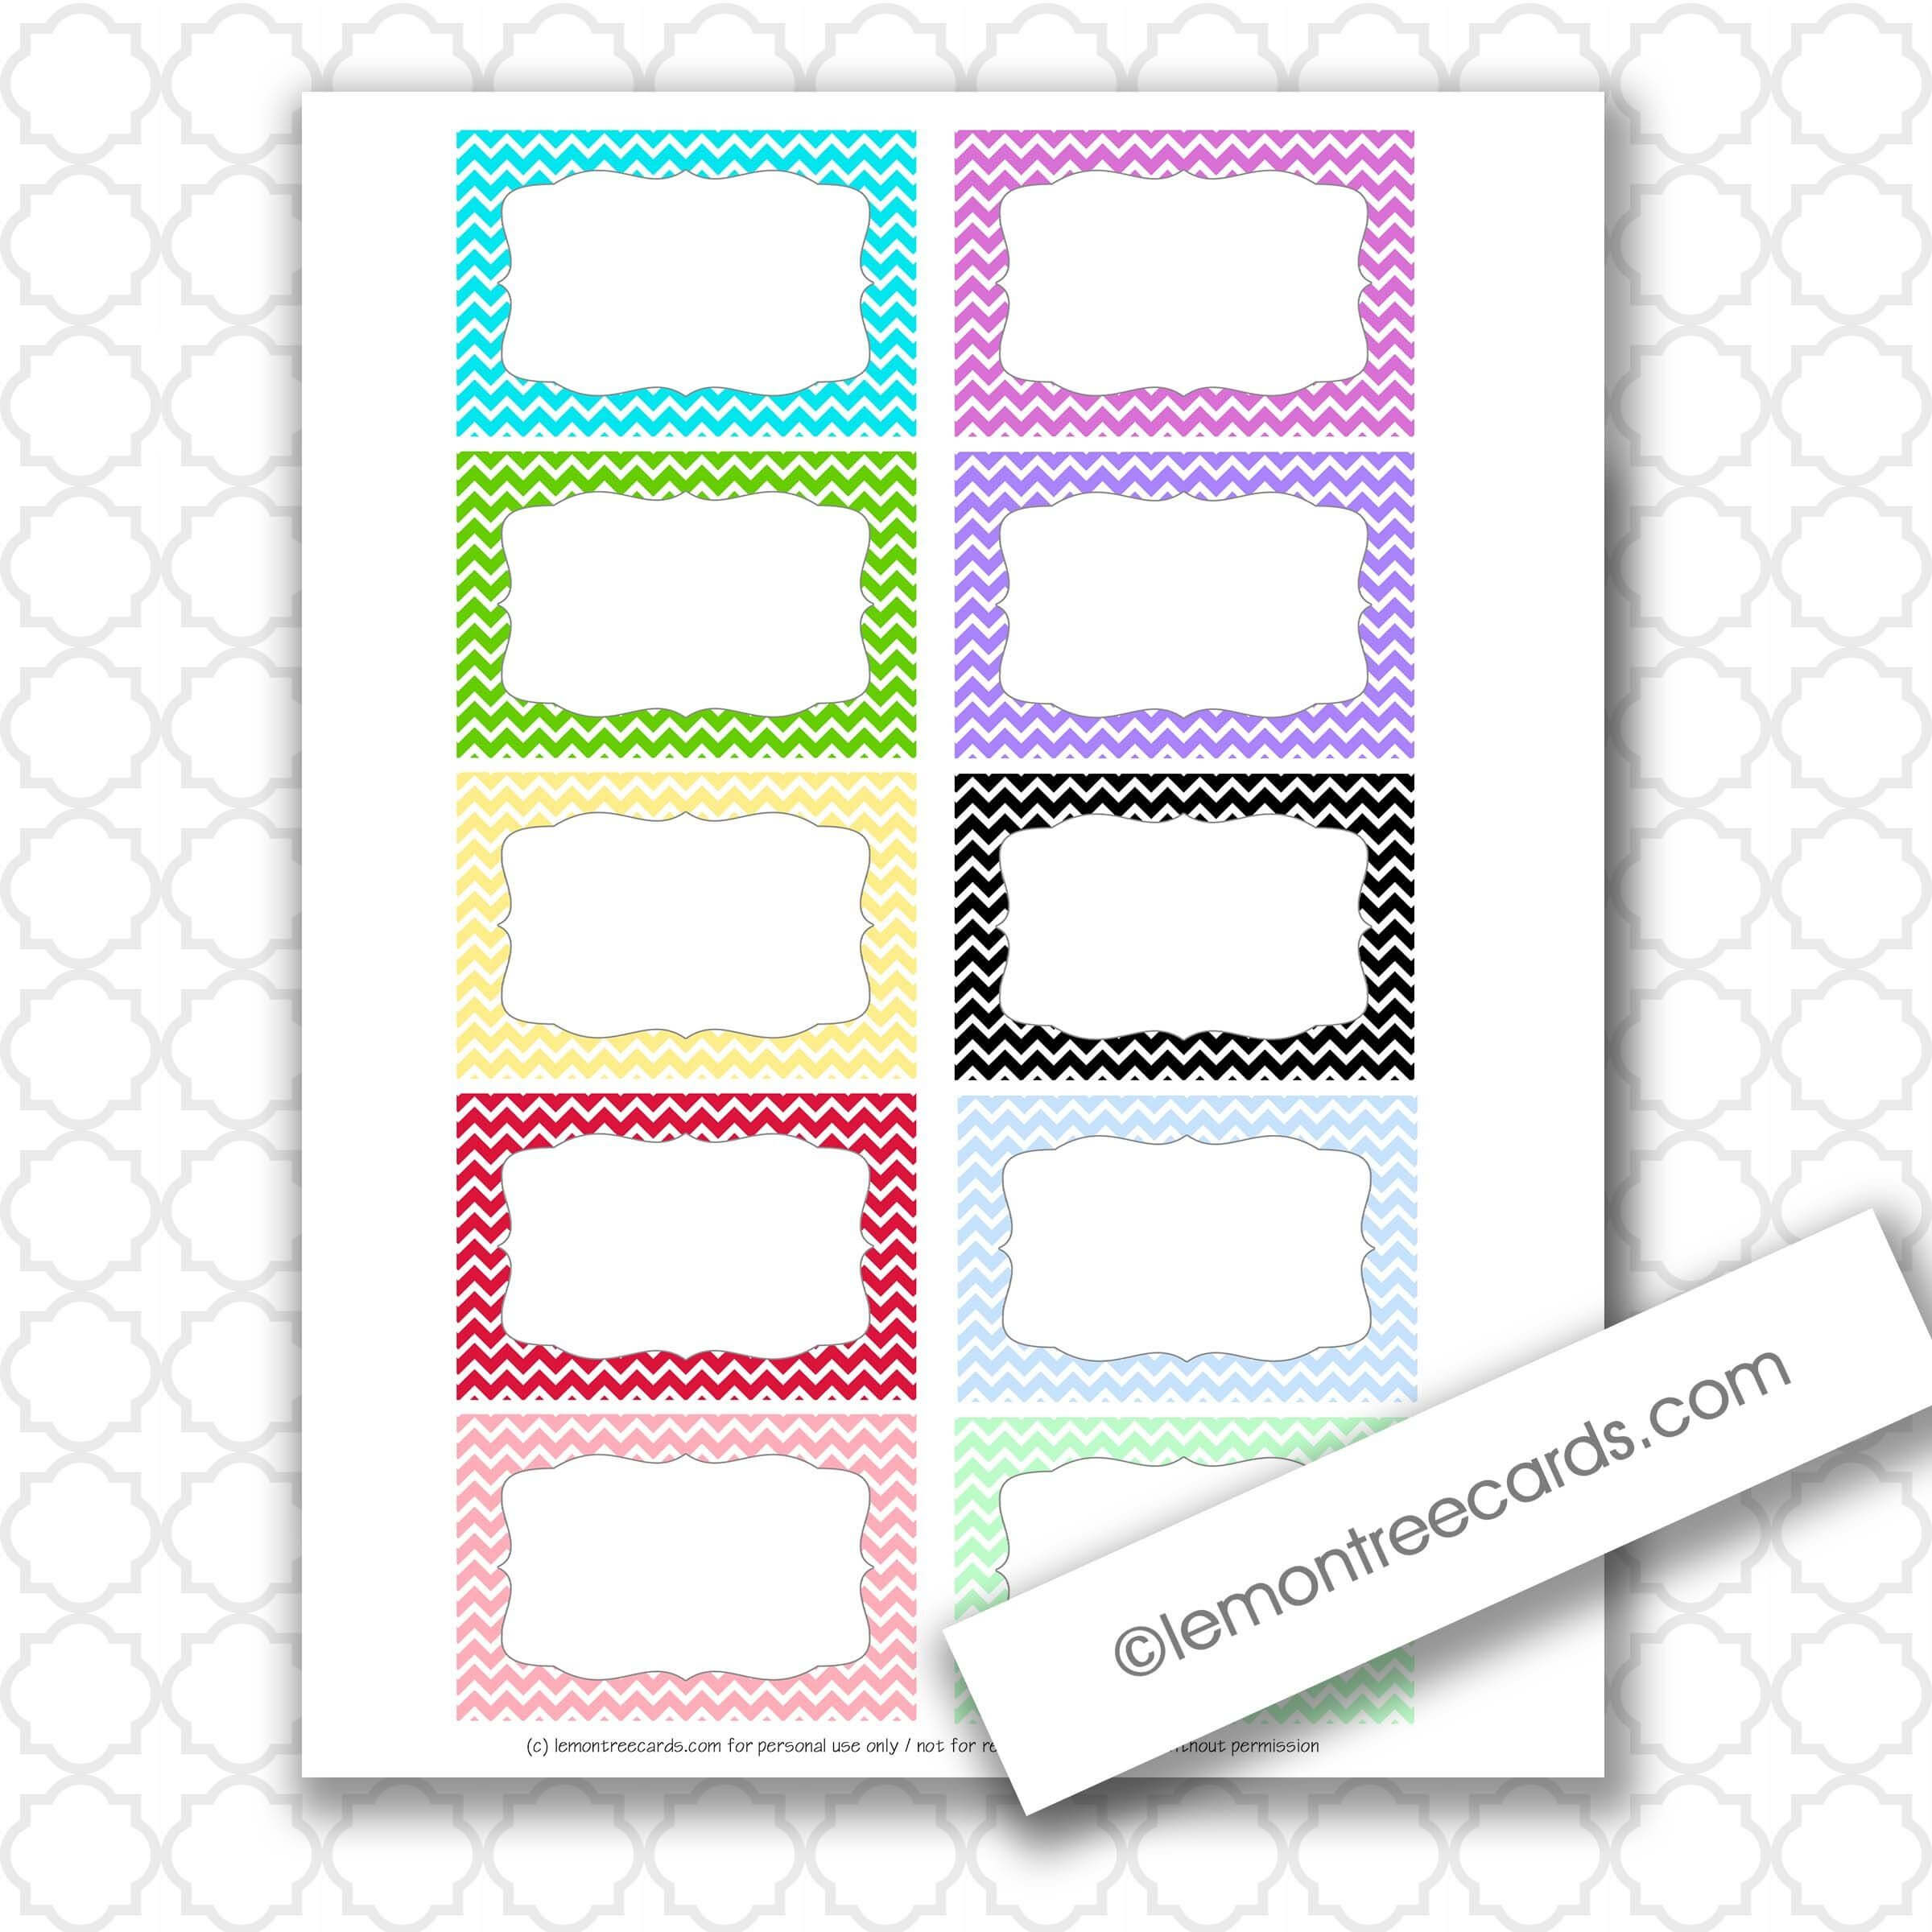 007 Free Index Card Template Ideas Surprising Printable Throughout 3X5 Blank Index Card Template